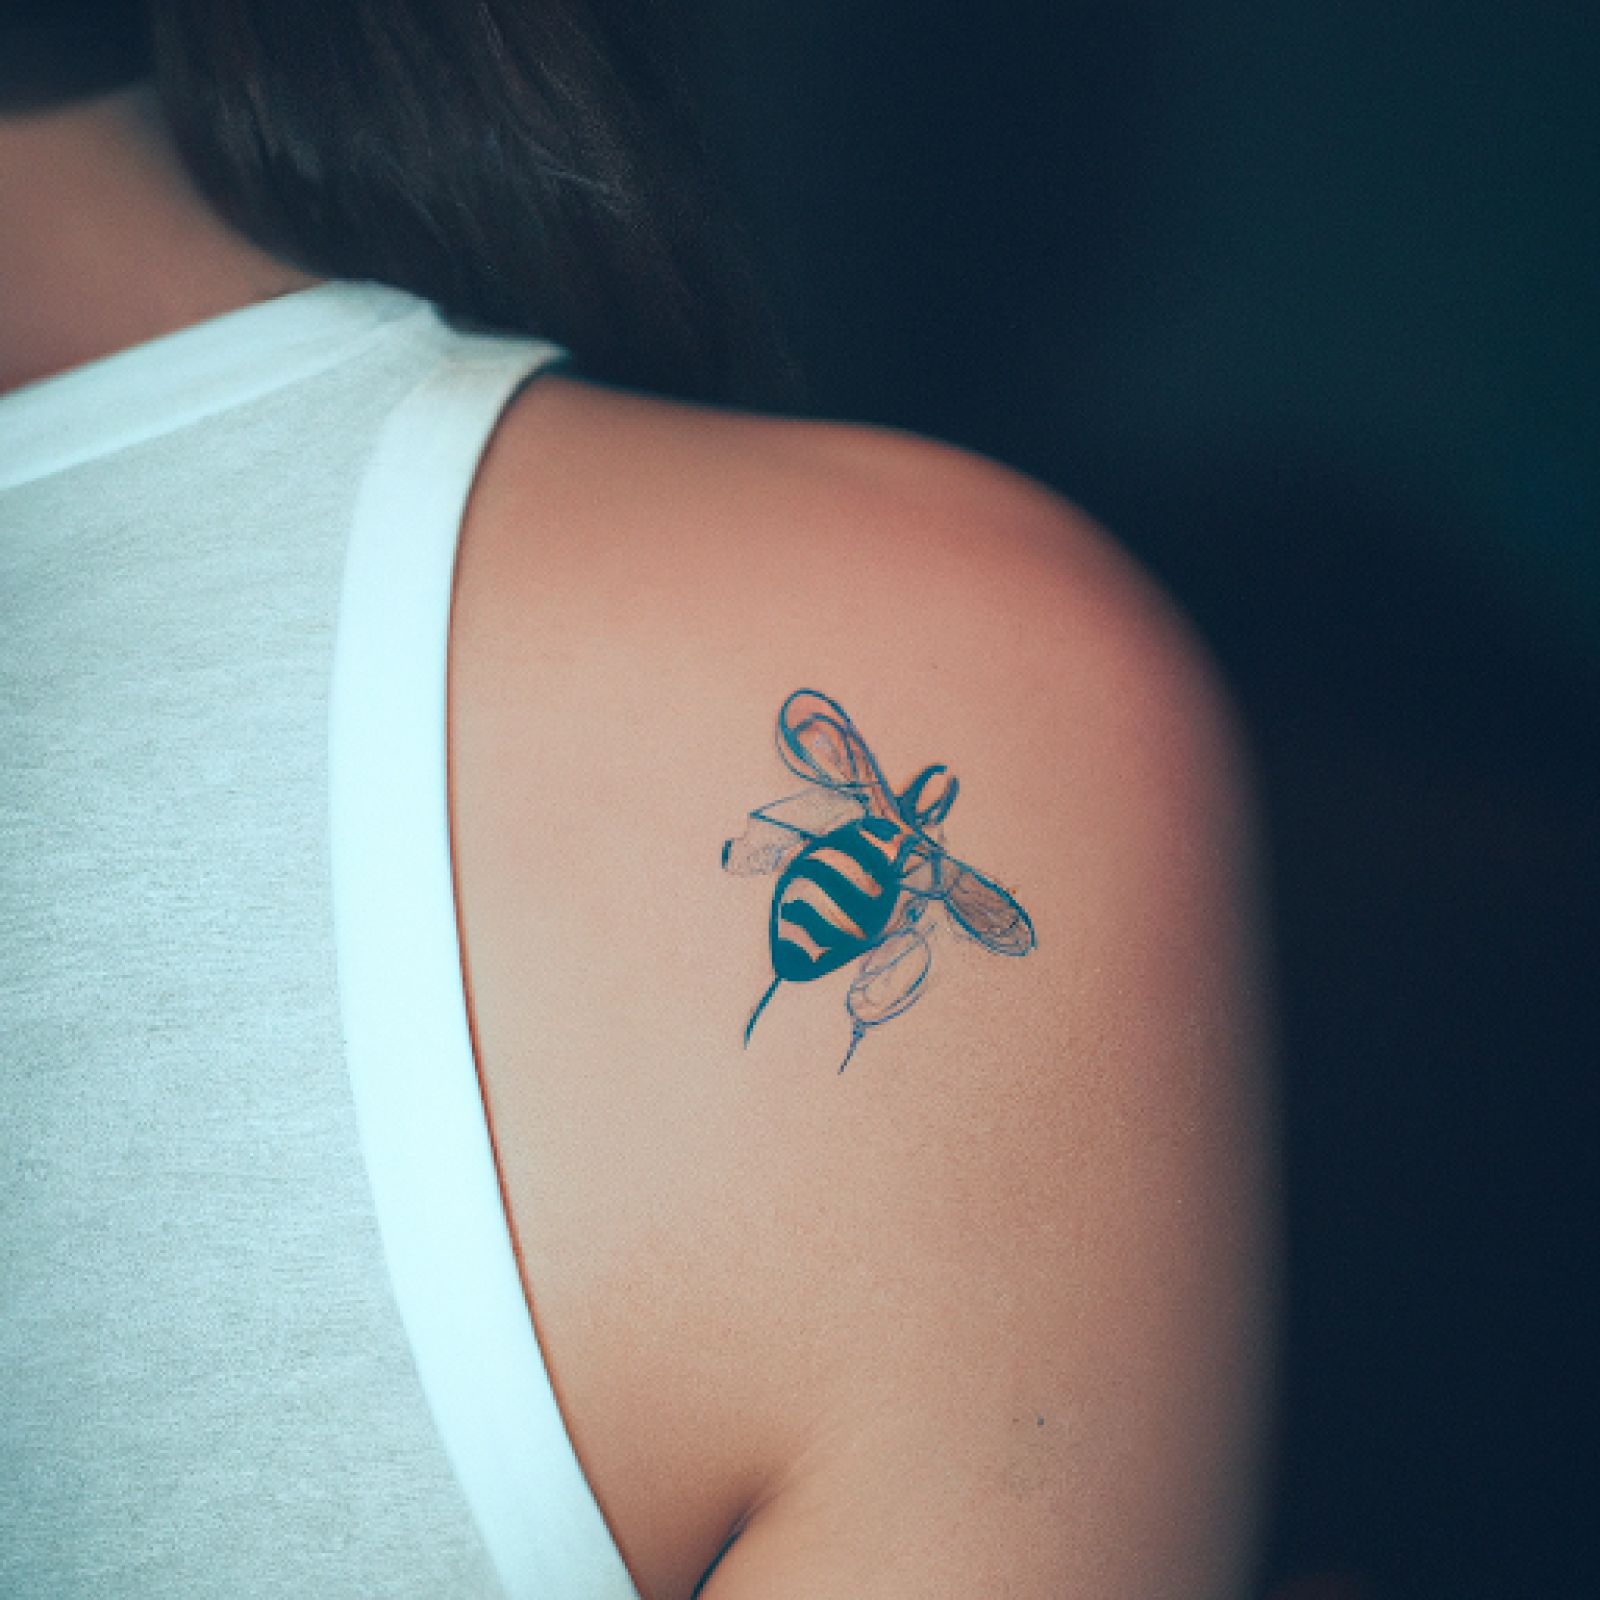 Bee tattoo on shoulder for women